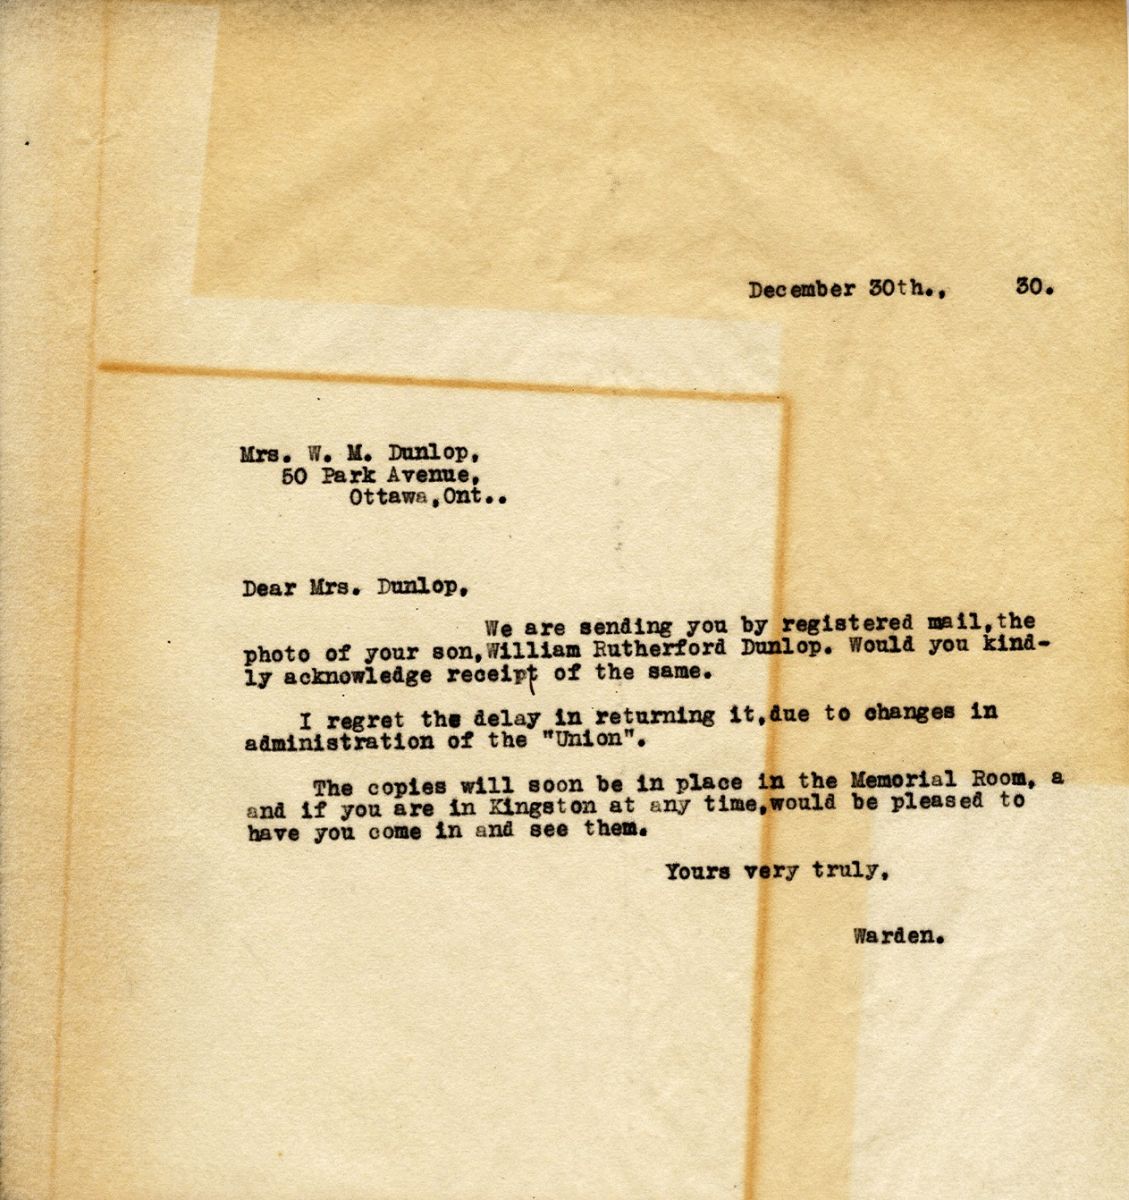 Letter from the Warden to Mrs. W.M. Dunlop, 30th December 1930